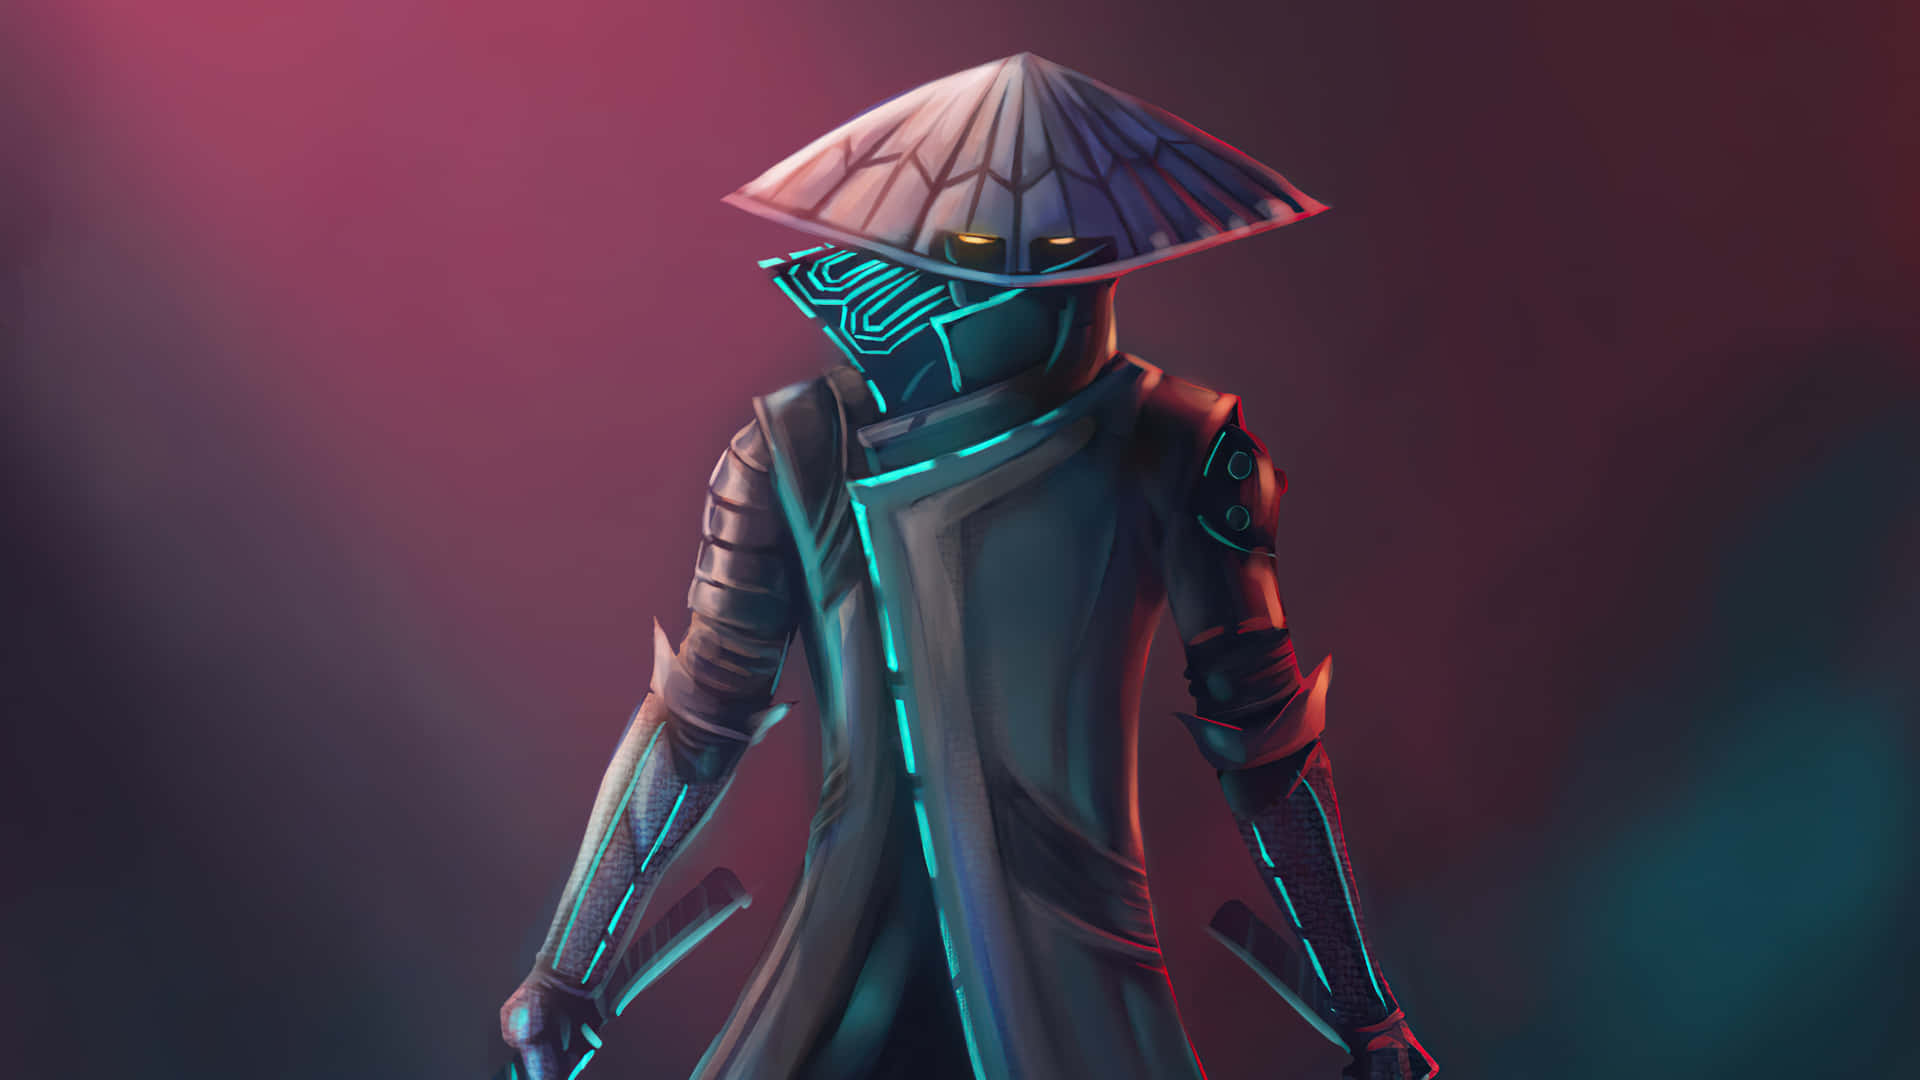 Ronin Warrior in a Mystical Forest Wallpaper